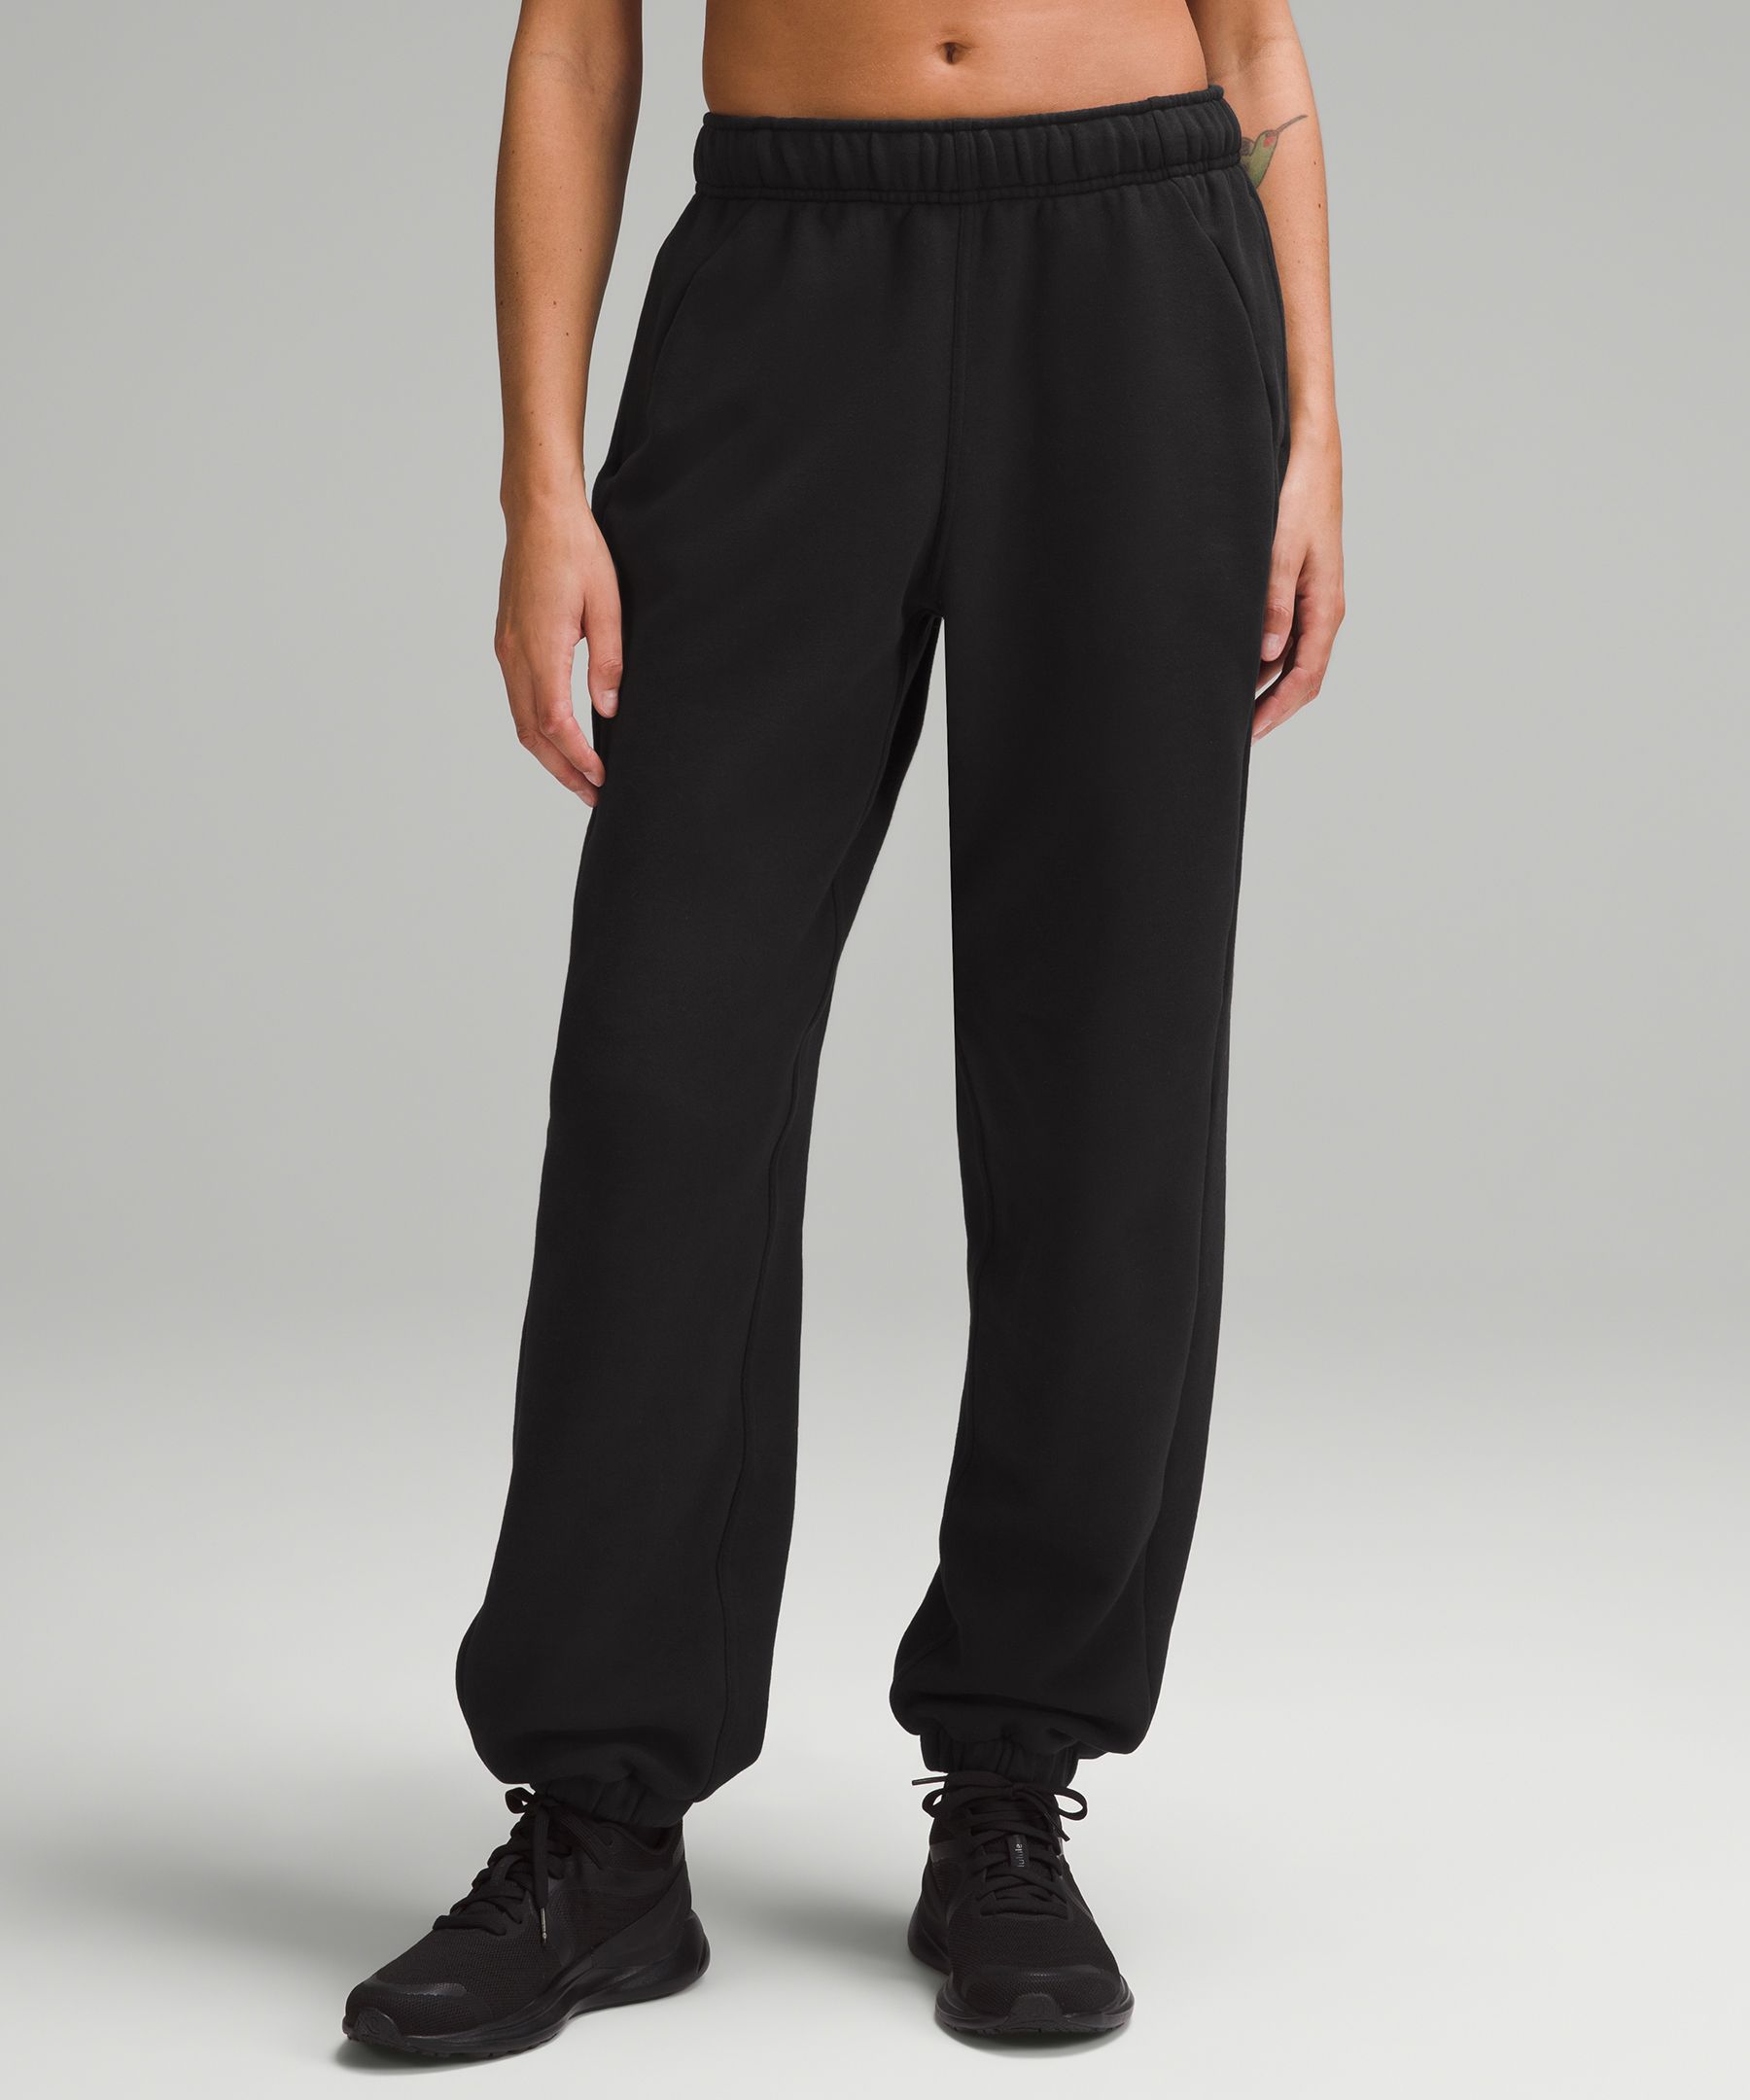 ✨ Wide Leg Sweatpant, Lulu Inspired✨ I have found the best lightly  fleece lined sweatpants that are so similar to the sold out